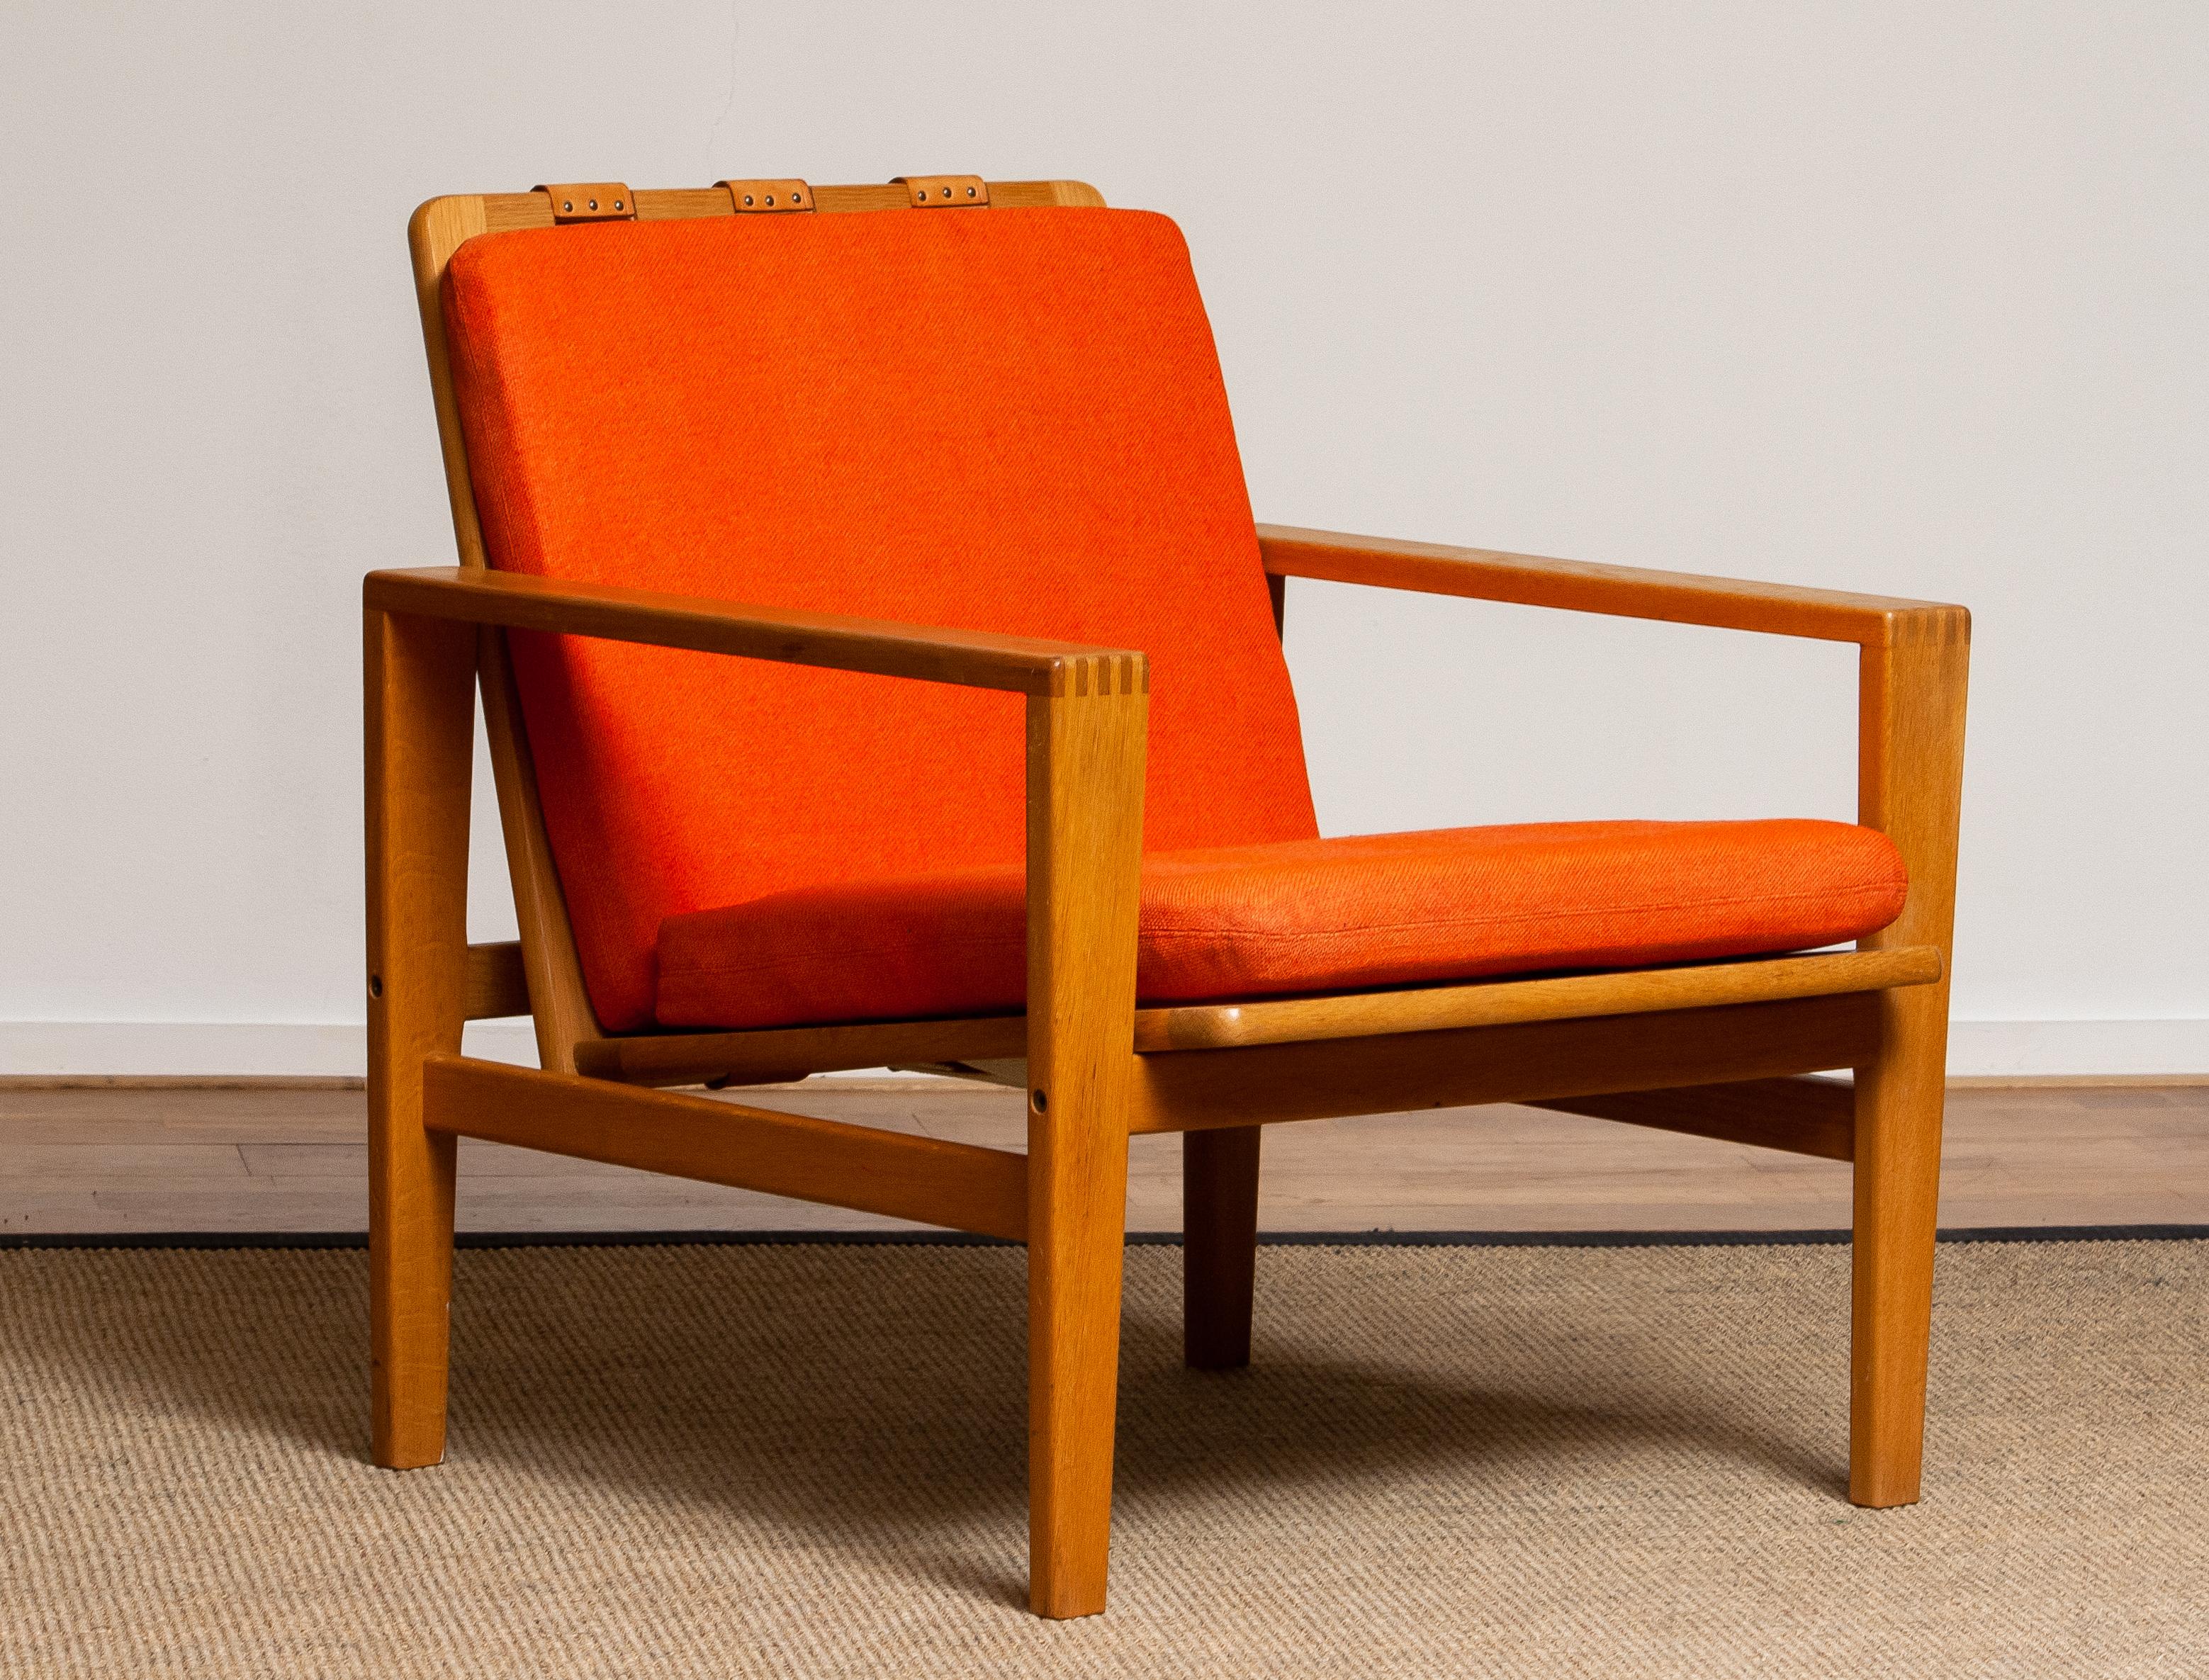 Comfortable Scandinavian lounge chair designed by Erik Merthen for Ire Skillingaryd Sweden, 1960s.
The oak frame is in perfect condition as well as the leather belts who supports the backrest. The cushions have been newly filled.
The overall